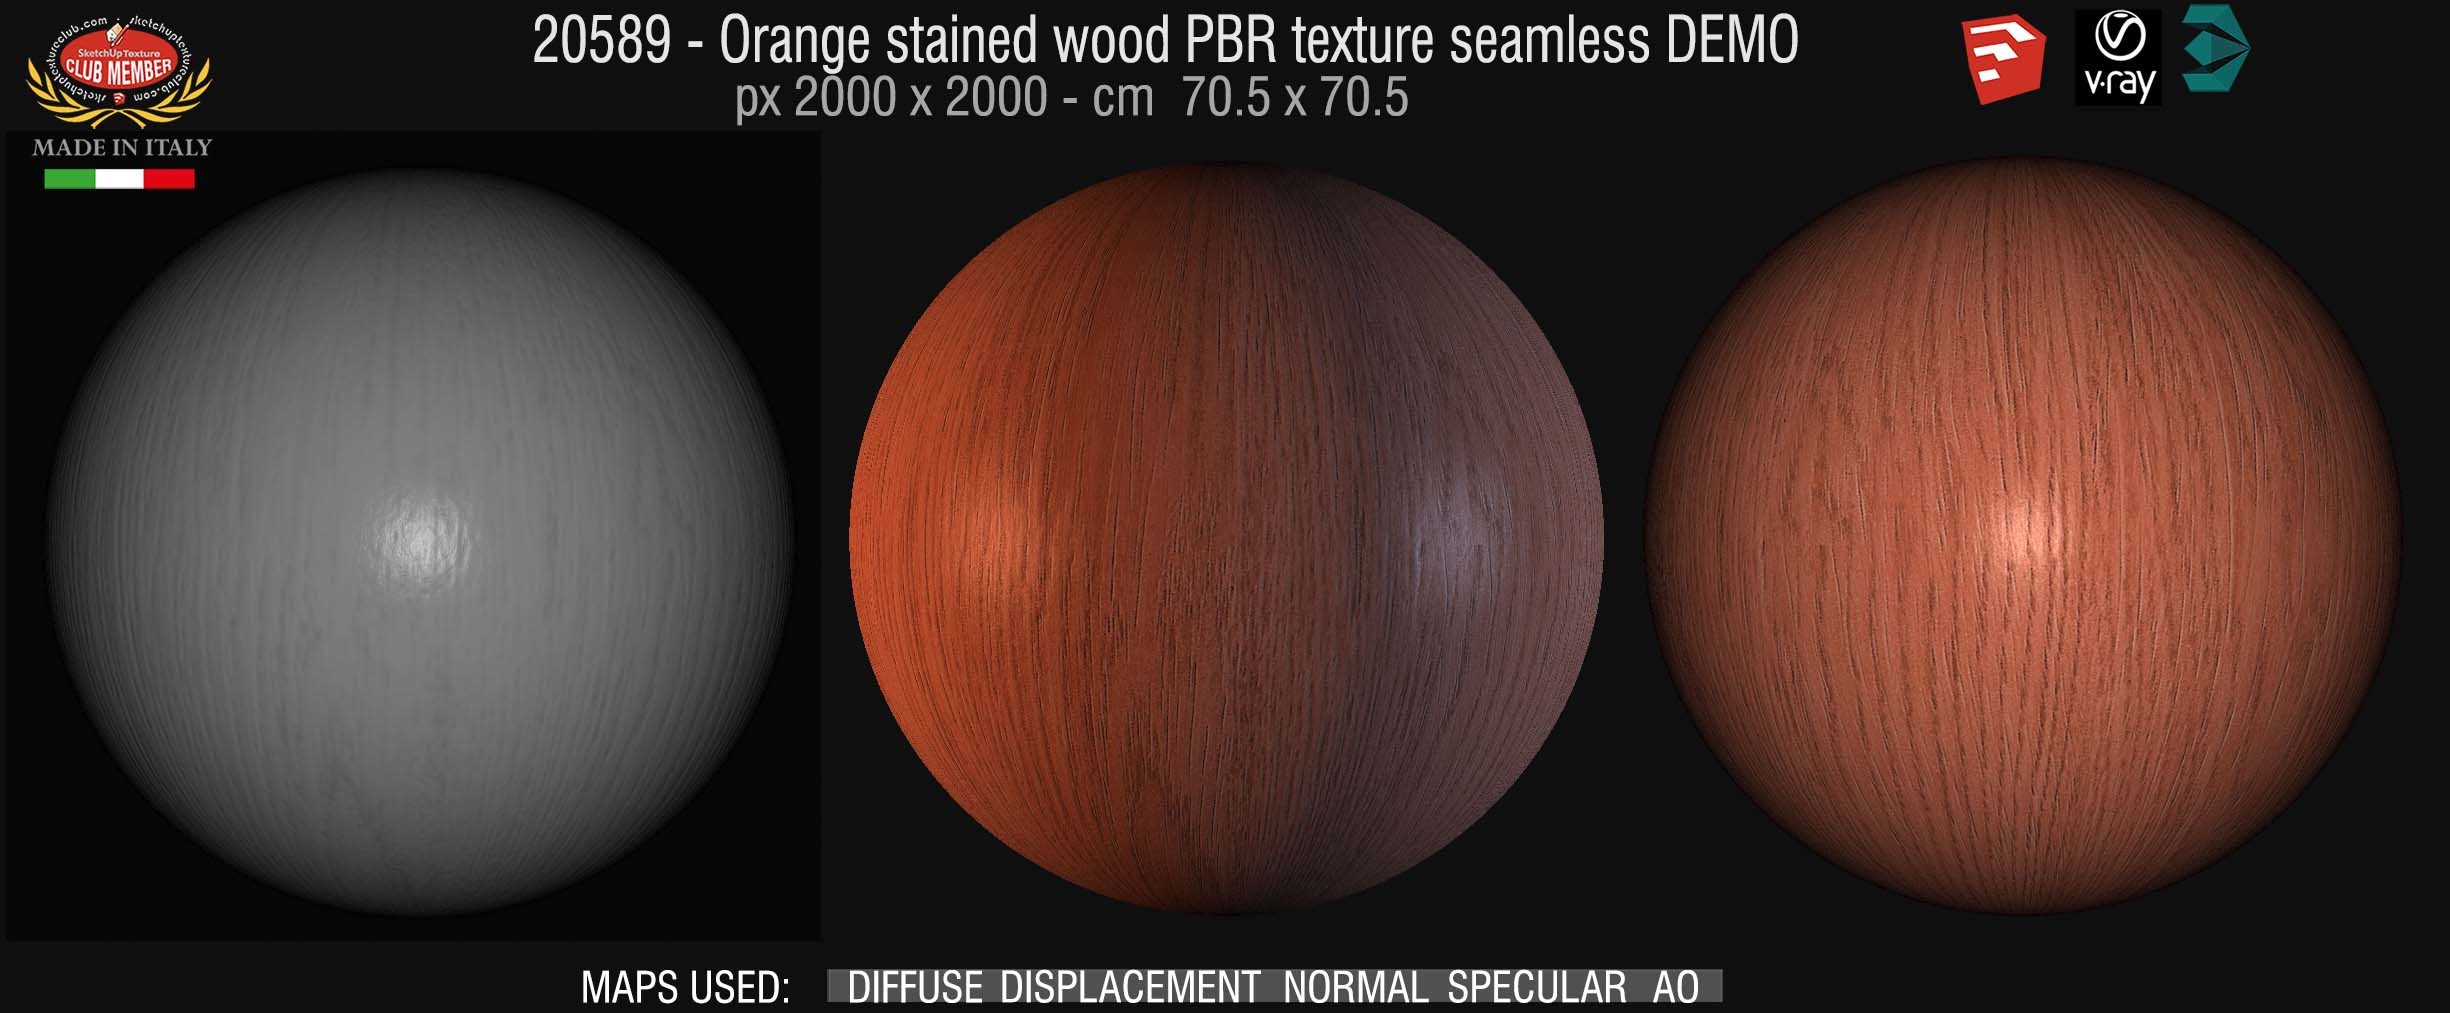 20589 Orange stained wood PBR texture seamless DEMO